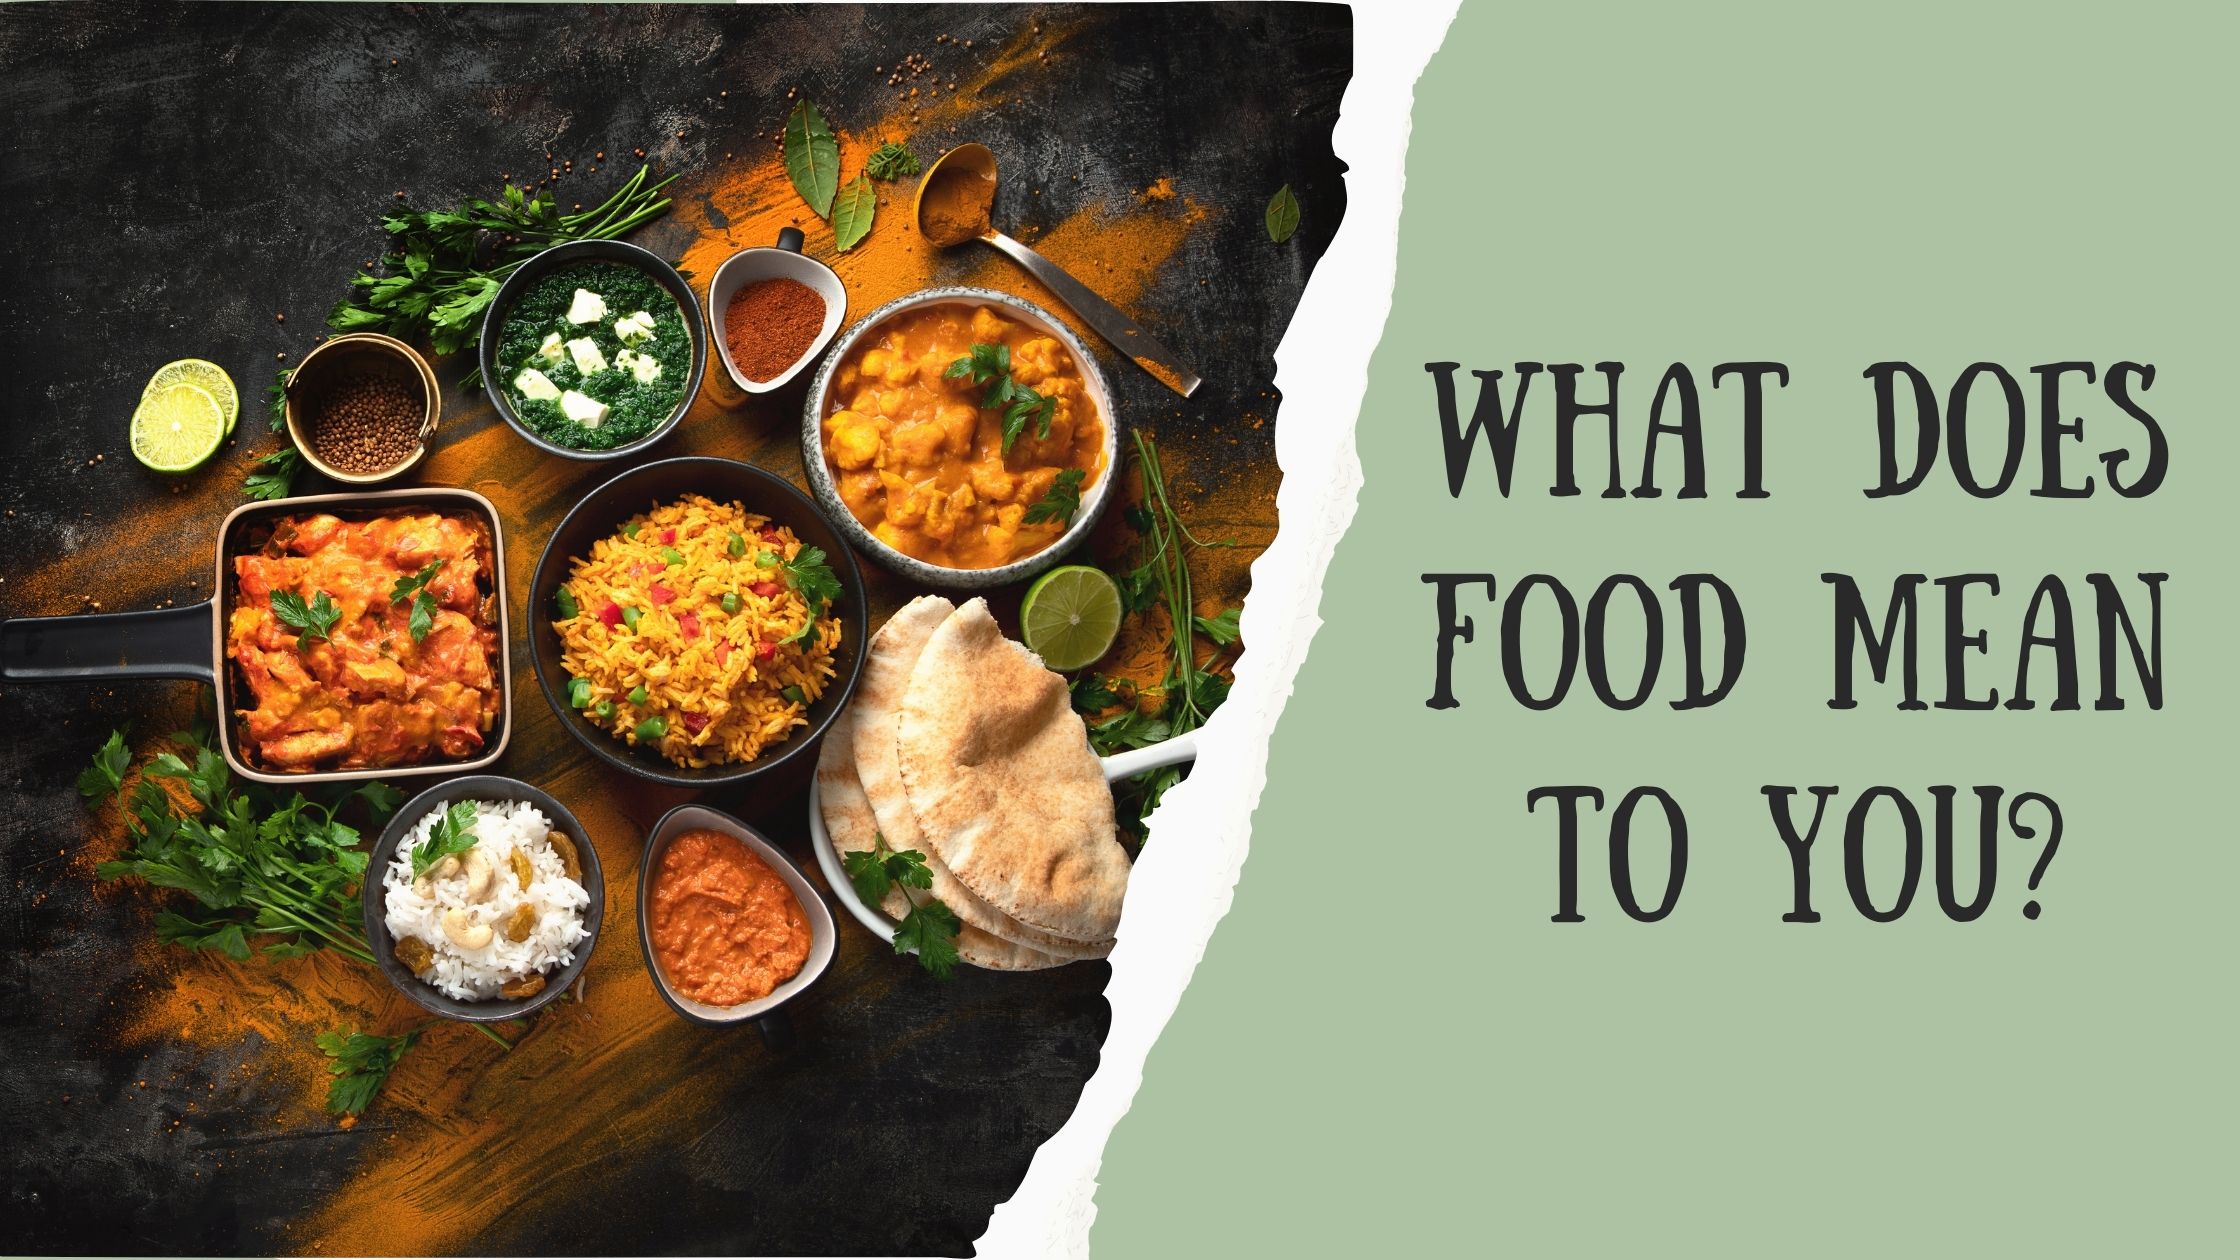 What does food mean to you?